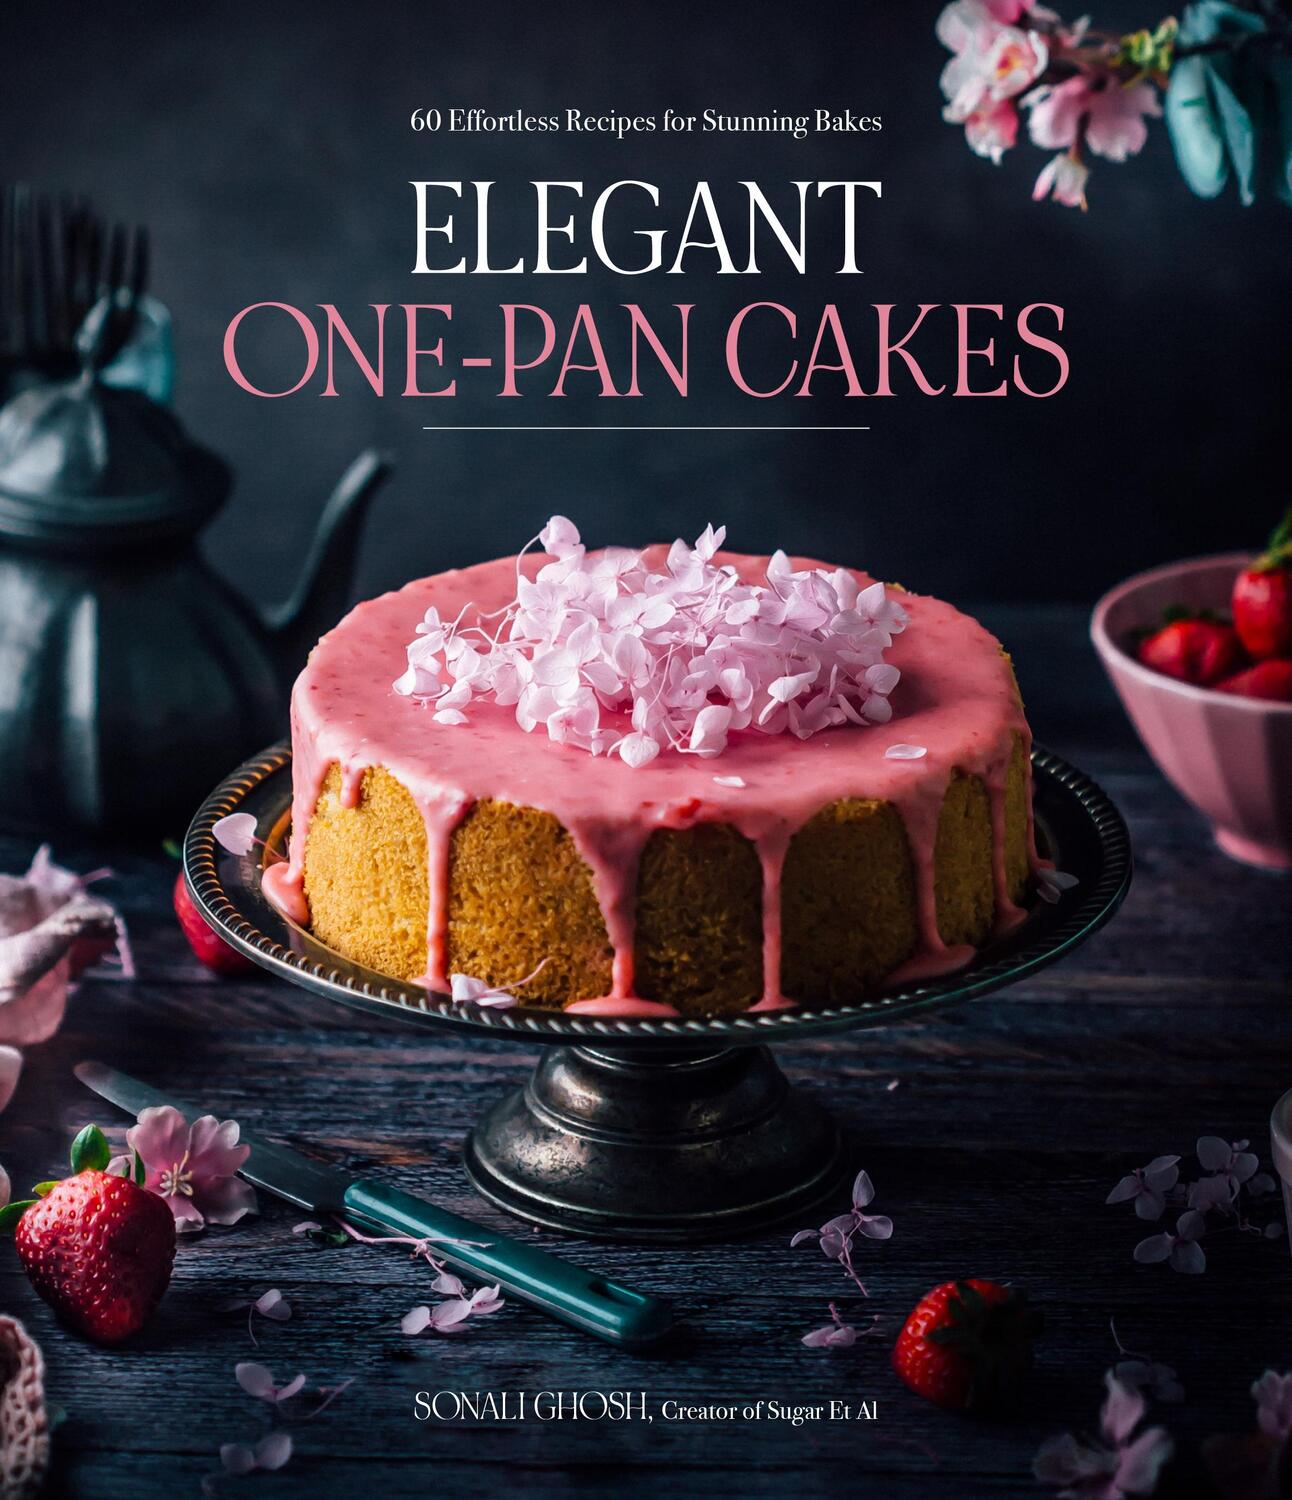 Autor: 9781645678106 | Elegant One-Pan Cakes | 60 Effortless Recipes for Stunning Bakes